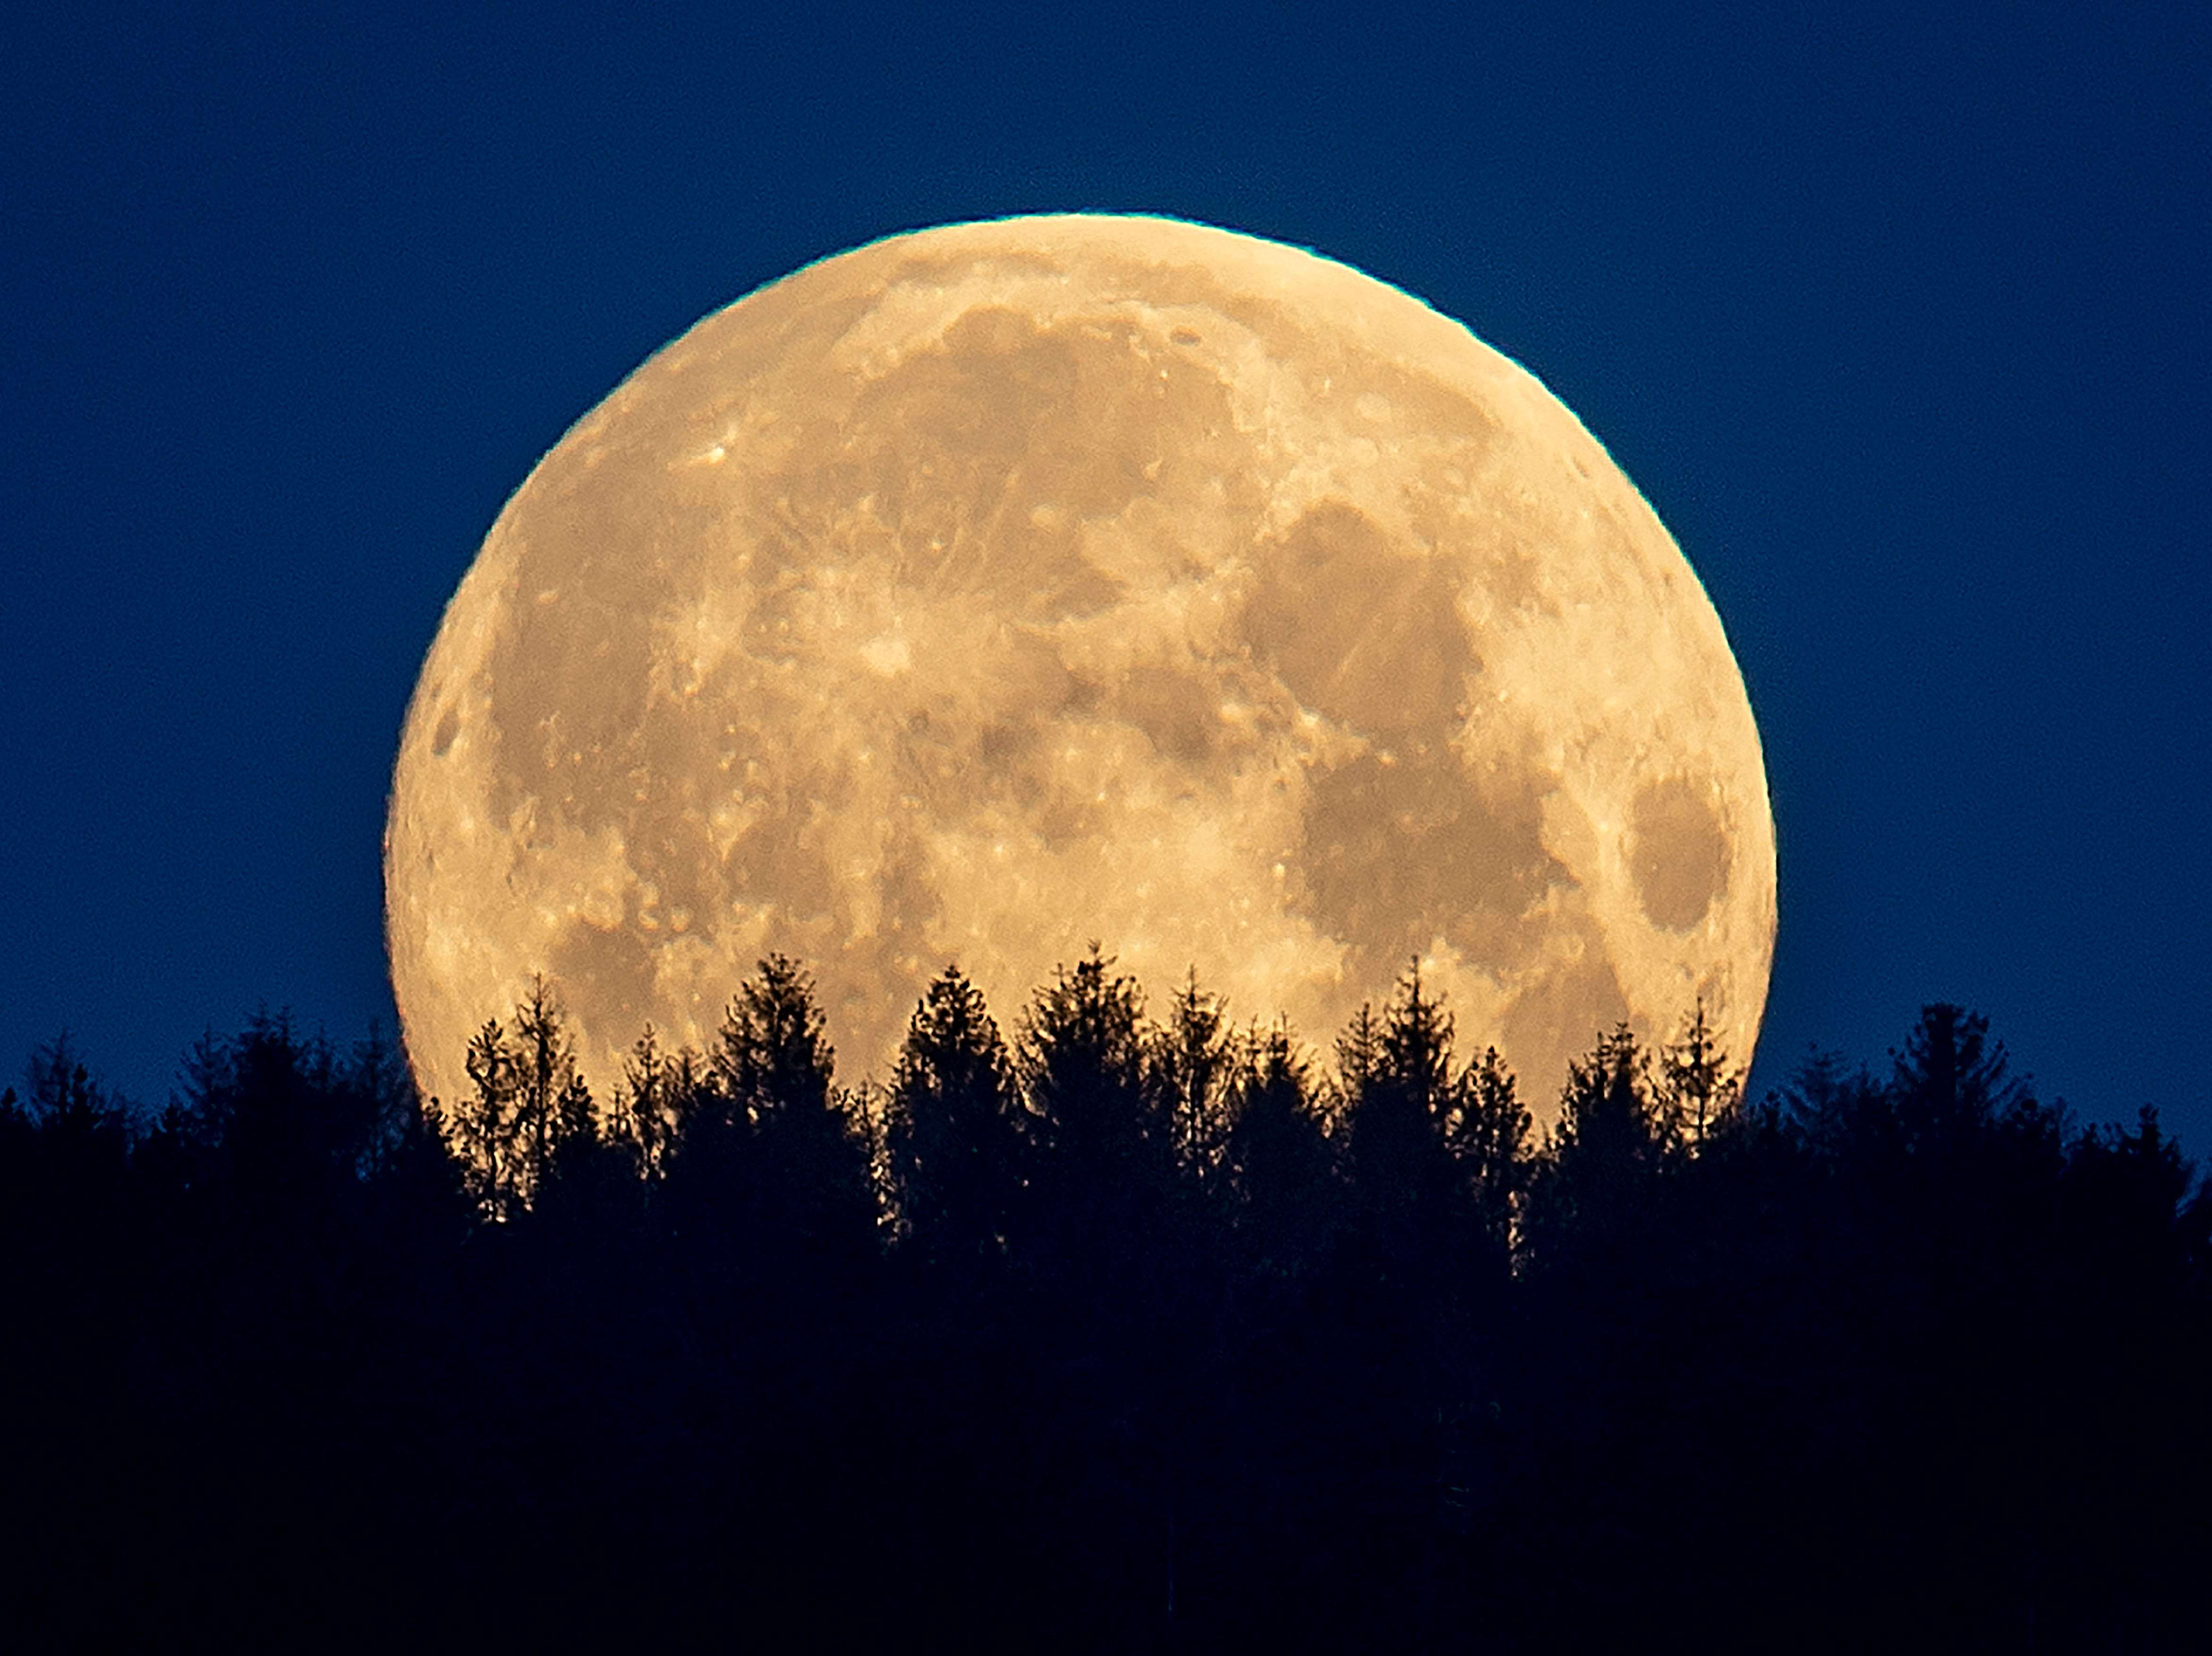 A rare Blue Blood Moon rises on Halloween. Here's what that means